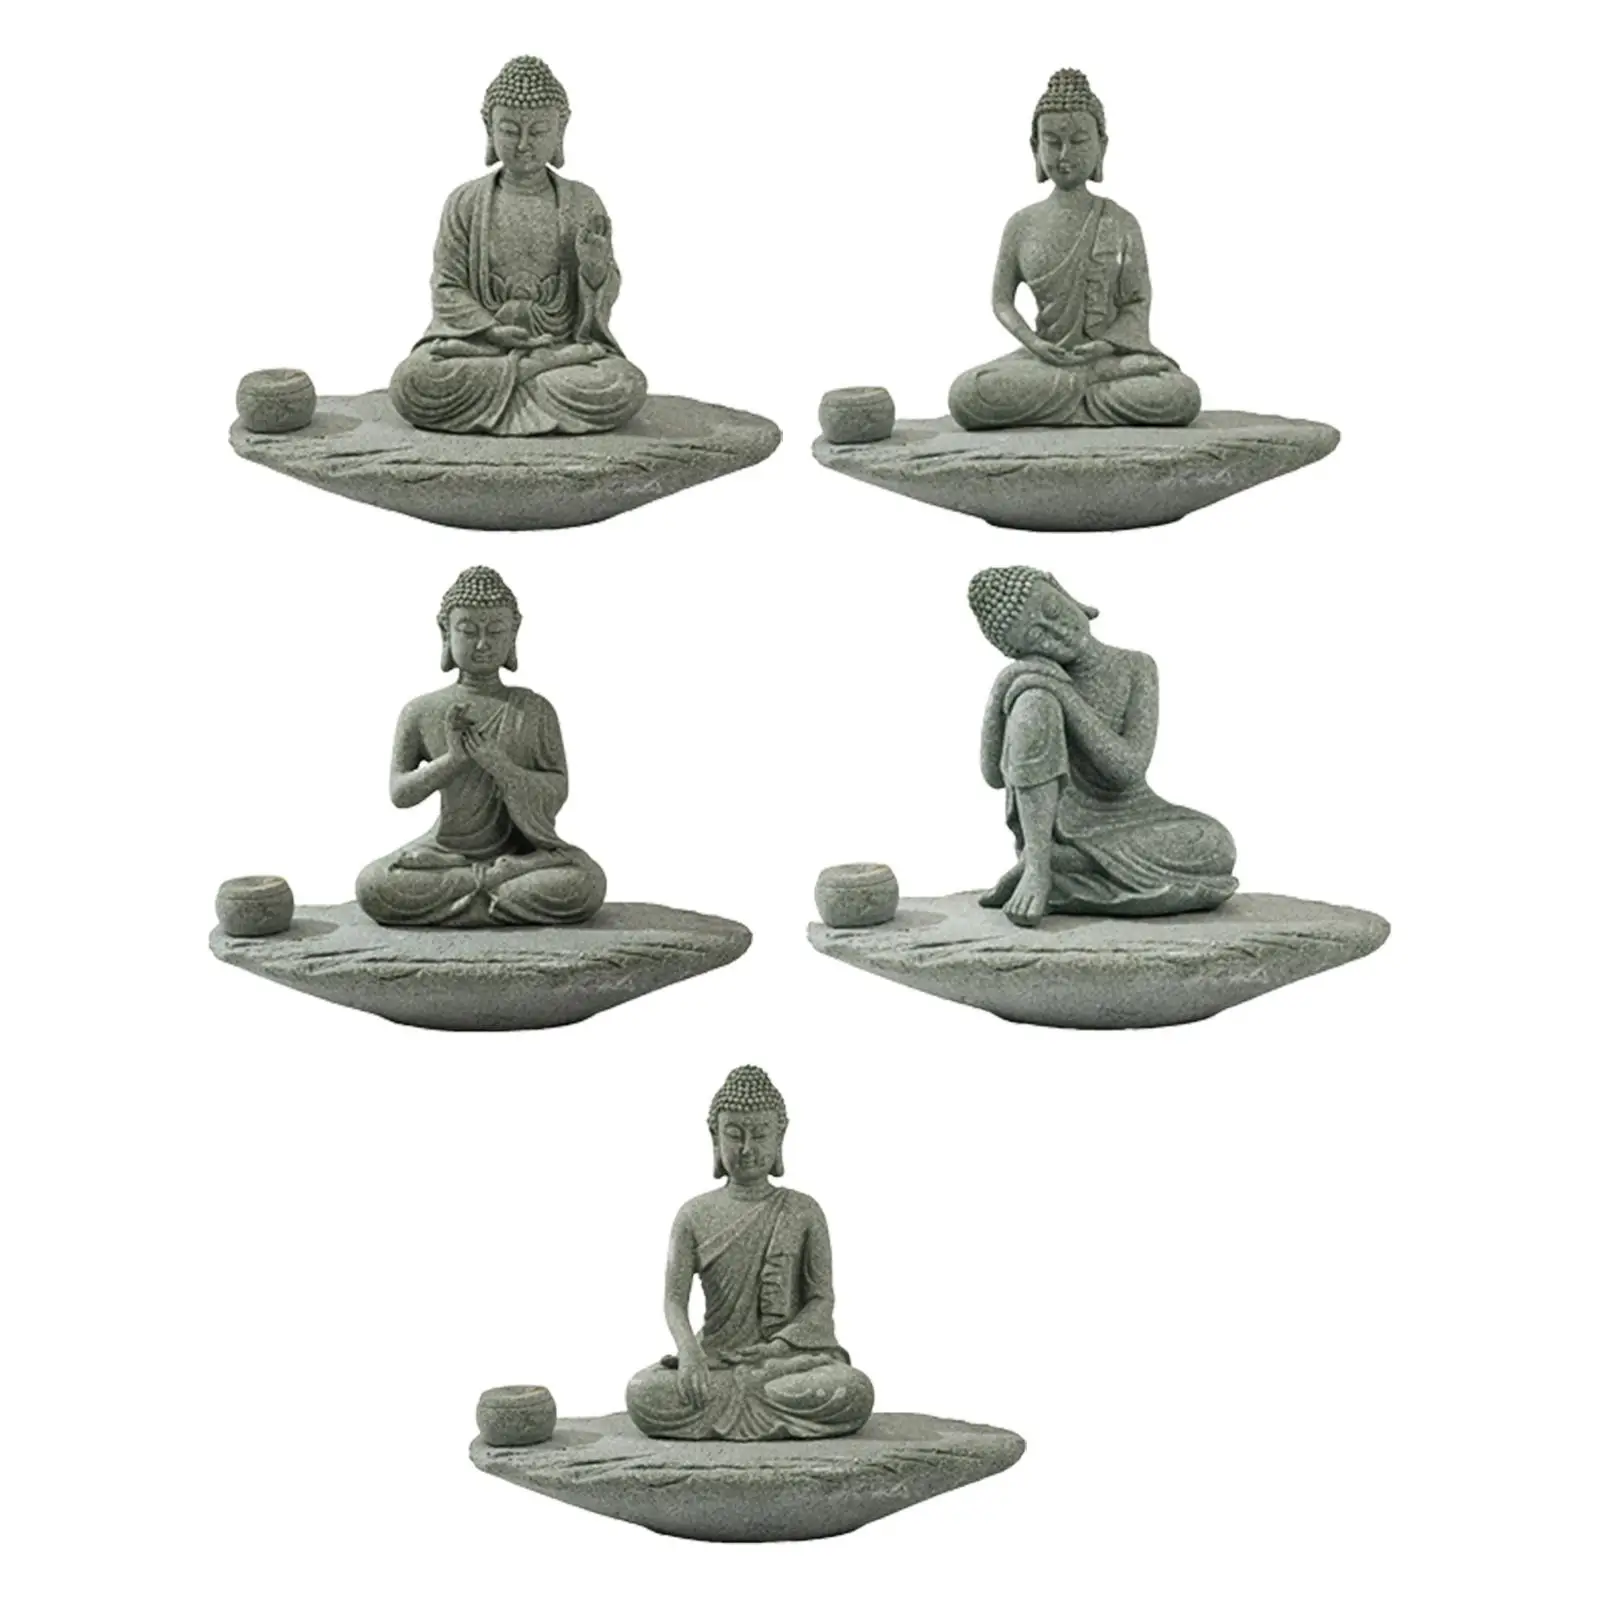 Incenses Burner with Buddha Figurines for Fireplace Meditation Farmhouse